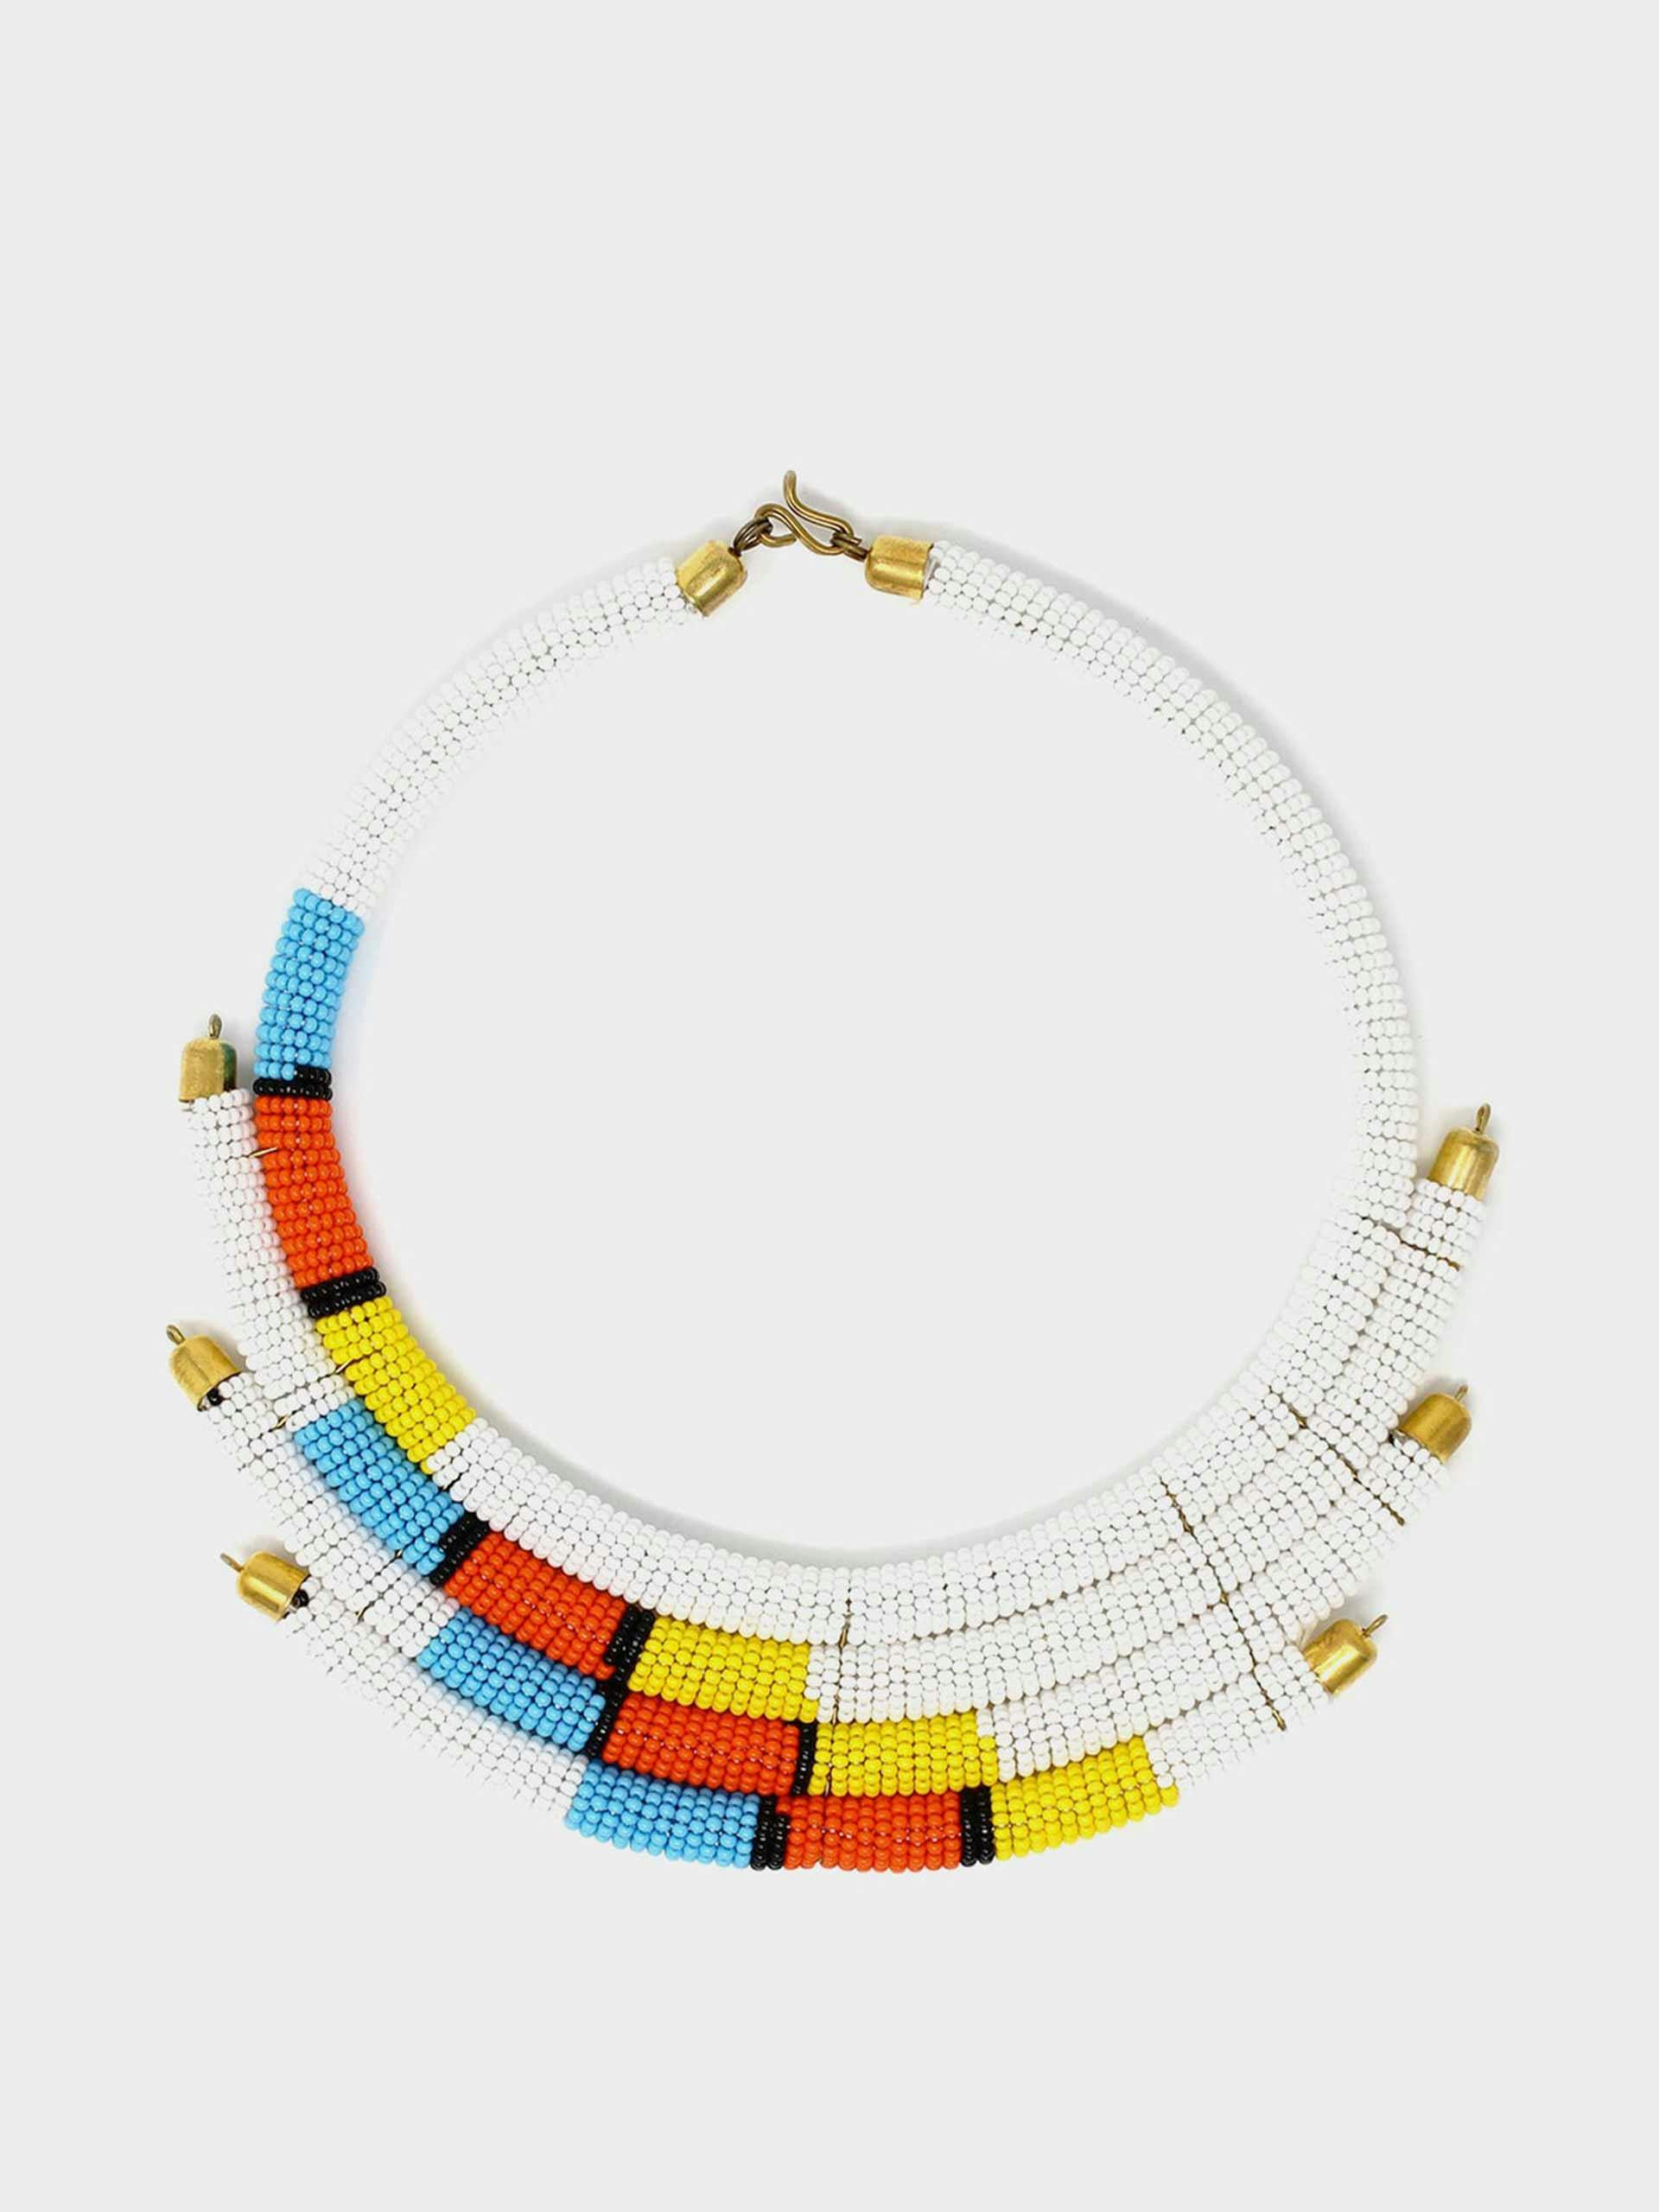 Isolo Maasai beaded necklace